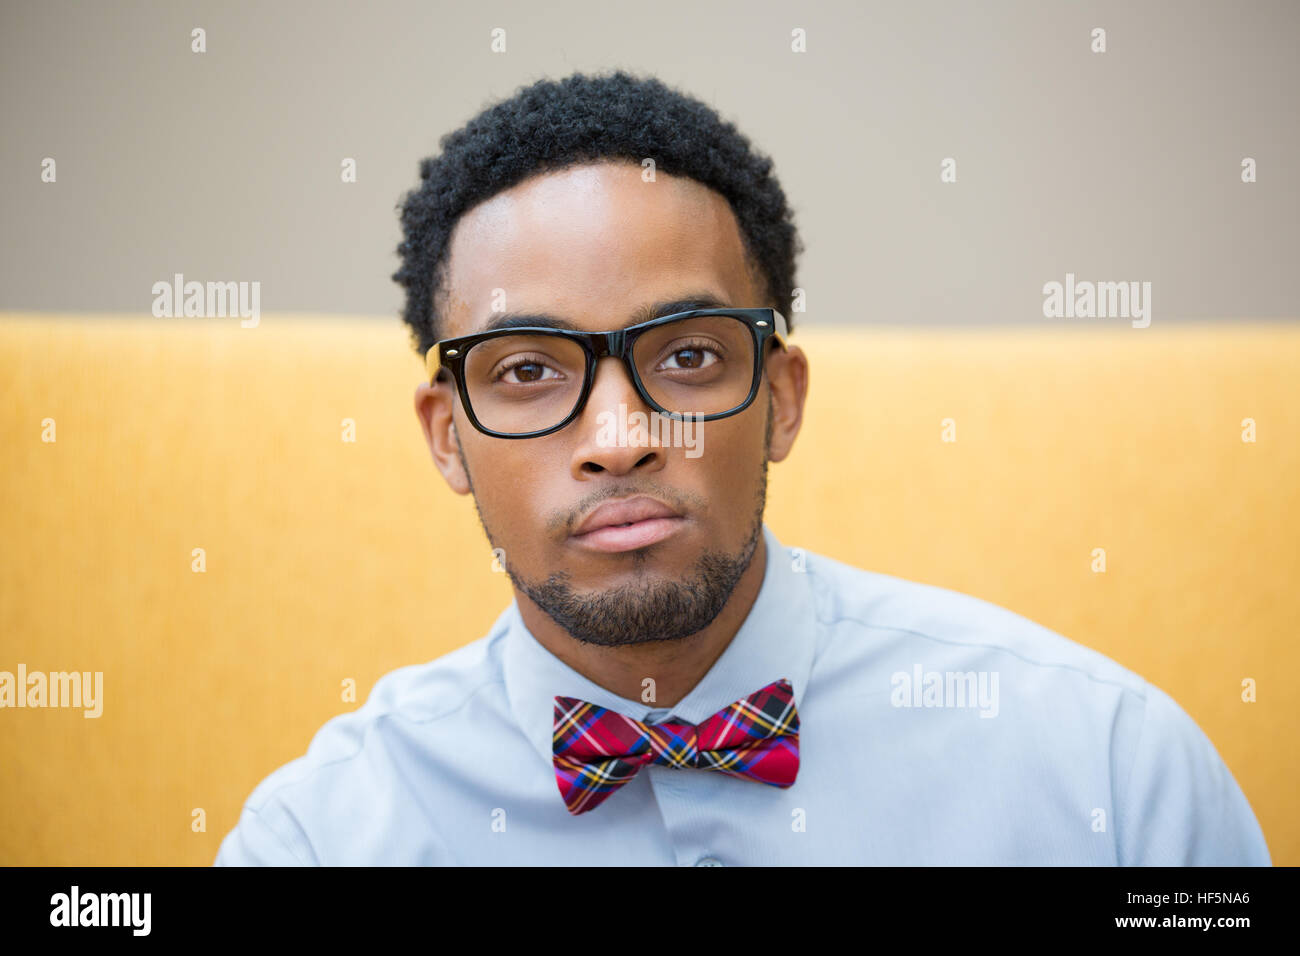 Closeup portrait headshot, high iq, intelligent guy with black glasses and bow tie, isolated yellow white background Stock Photo